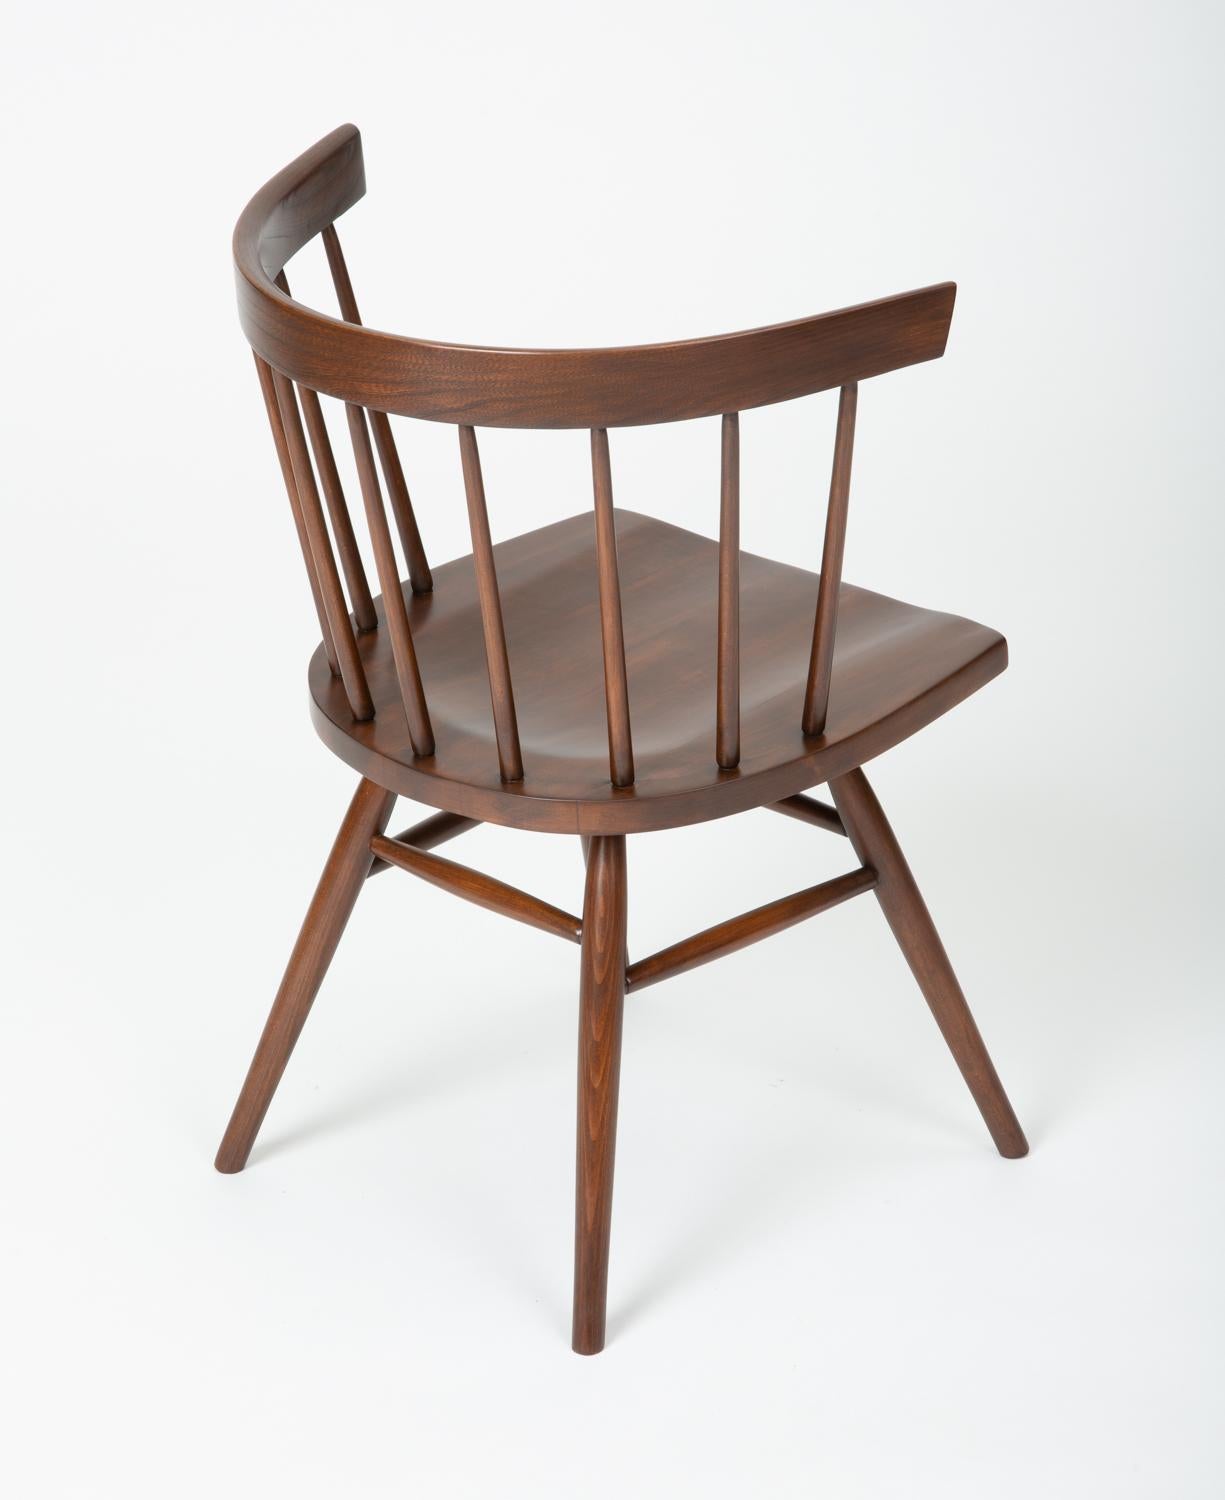 Walnut N19 Chair by George Nakashima for Knoll